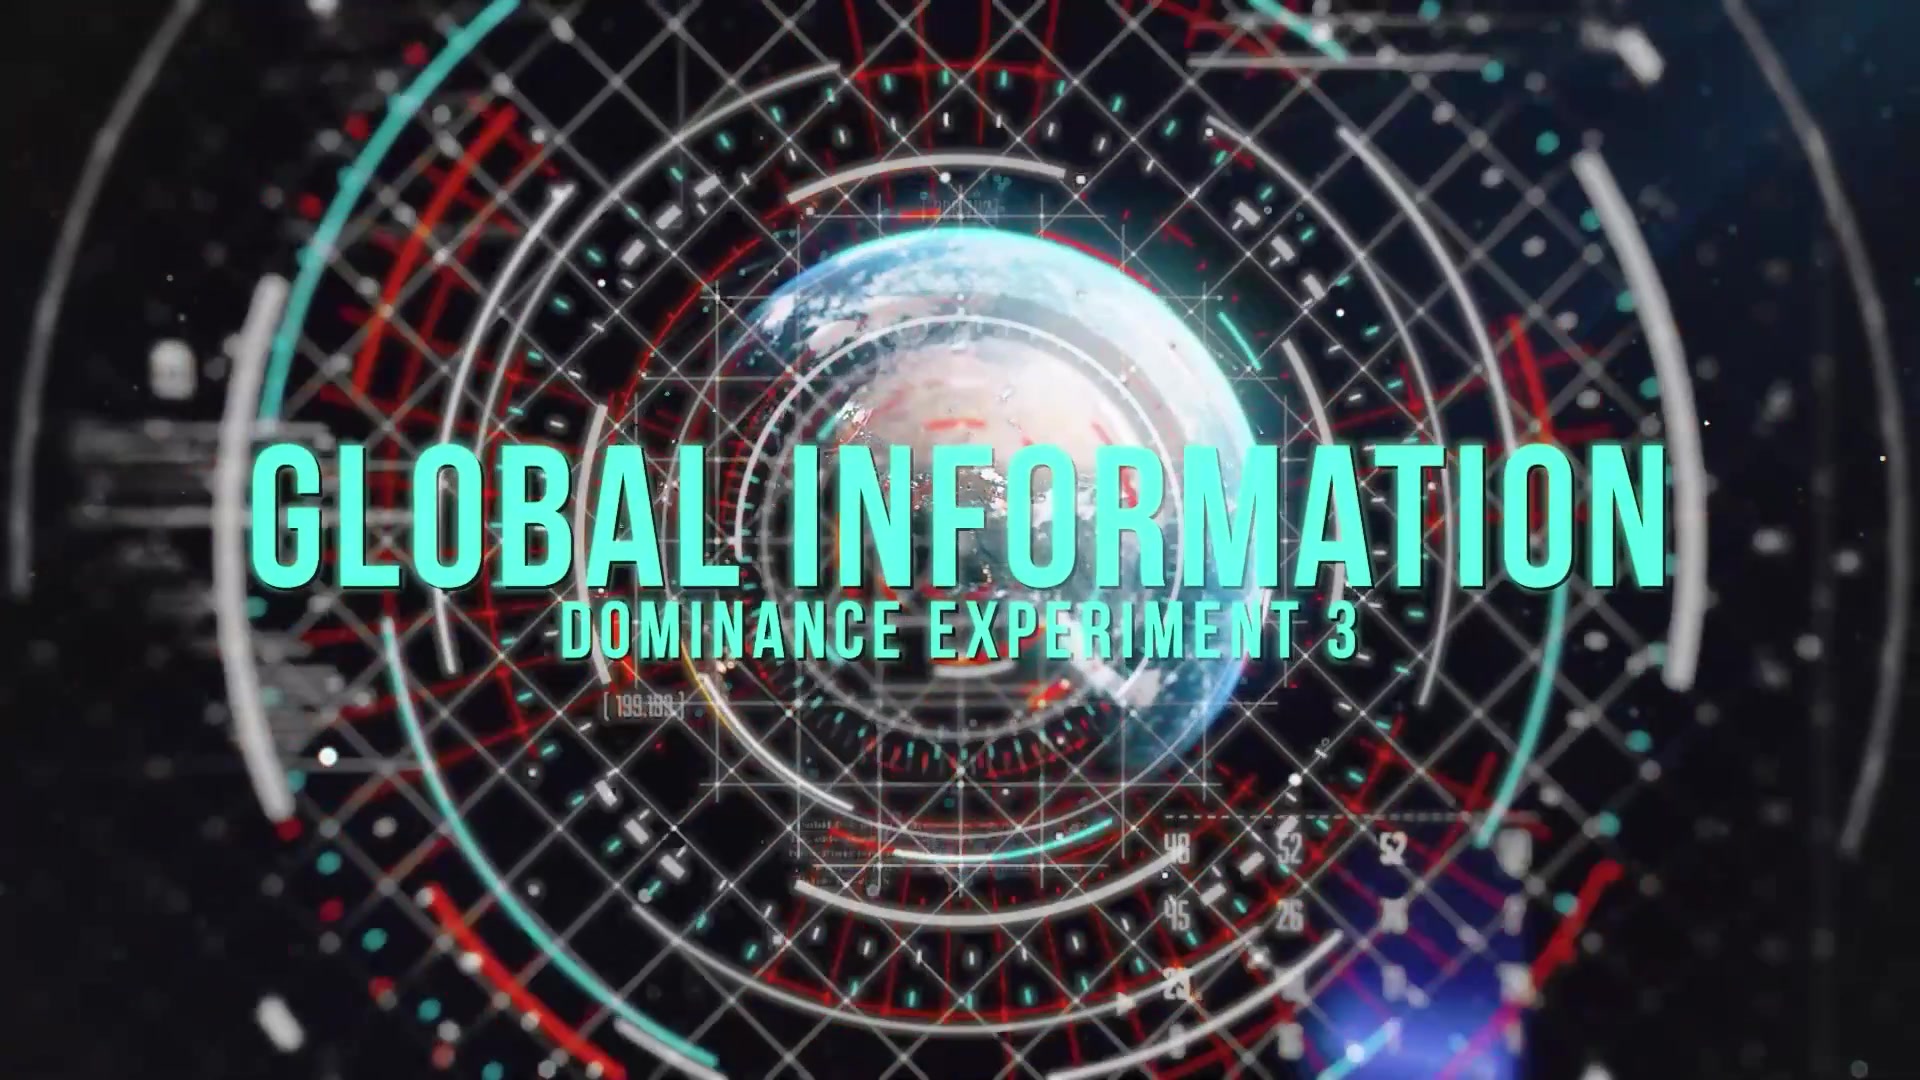 U.S. and Canadian service members participate in the third series of Global Information Dominance Experiments (GIDE 3), July 8-16, 2021. The North American Aerospace Defense Command (NORAD) and U.S. Northern Command (USNORTHCOM), in partnership with all 11 Combatant Commands, led GIDE 3, which is designed to rapidly develop the capabilities required to increase deterrence options in competition and crisis through a data-centric software-based approach. GIDE 3 events combine people and technology to innovate and accelerate system development for domain awareness, information dominance, decisional superiority, and global integration. The GIDE 3 experiment was executed in conjunction with the Department of the Air Force's Chief Architect Office (DAF CAO) as part of their fifth Architecture Demonstration and Evaluation event (ADE 5), and the Joint Artificial Intelligence Center. (DoD photo by N&NC Public Affairs)